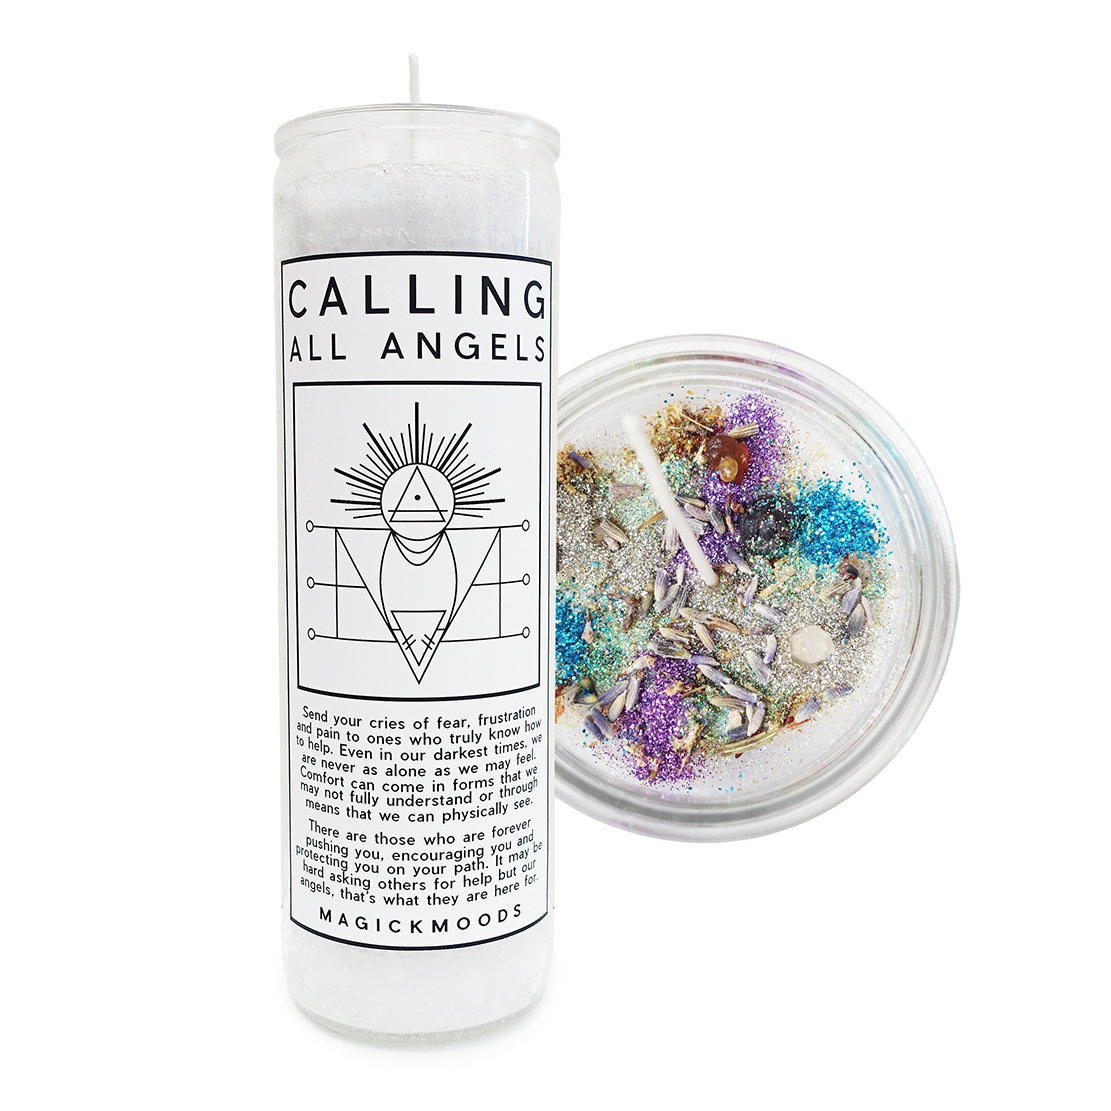 Calling All Angels 7-Day Meditation Candle - PREORDER - Ships by July 28th, 2023